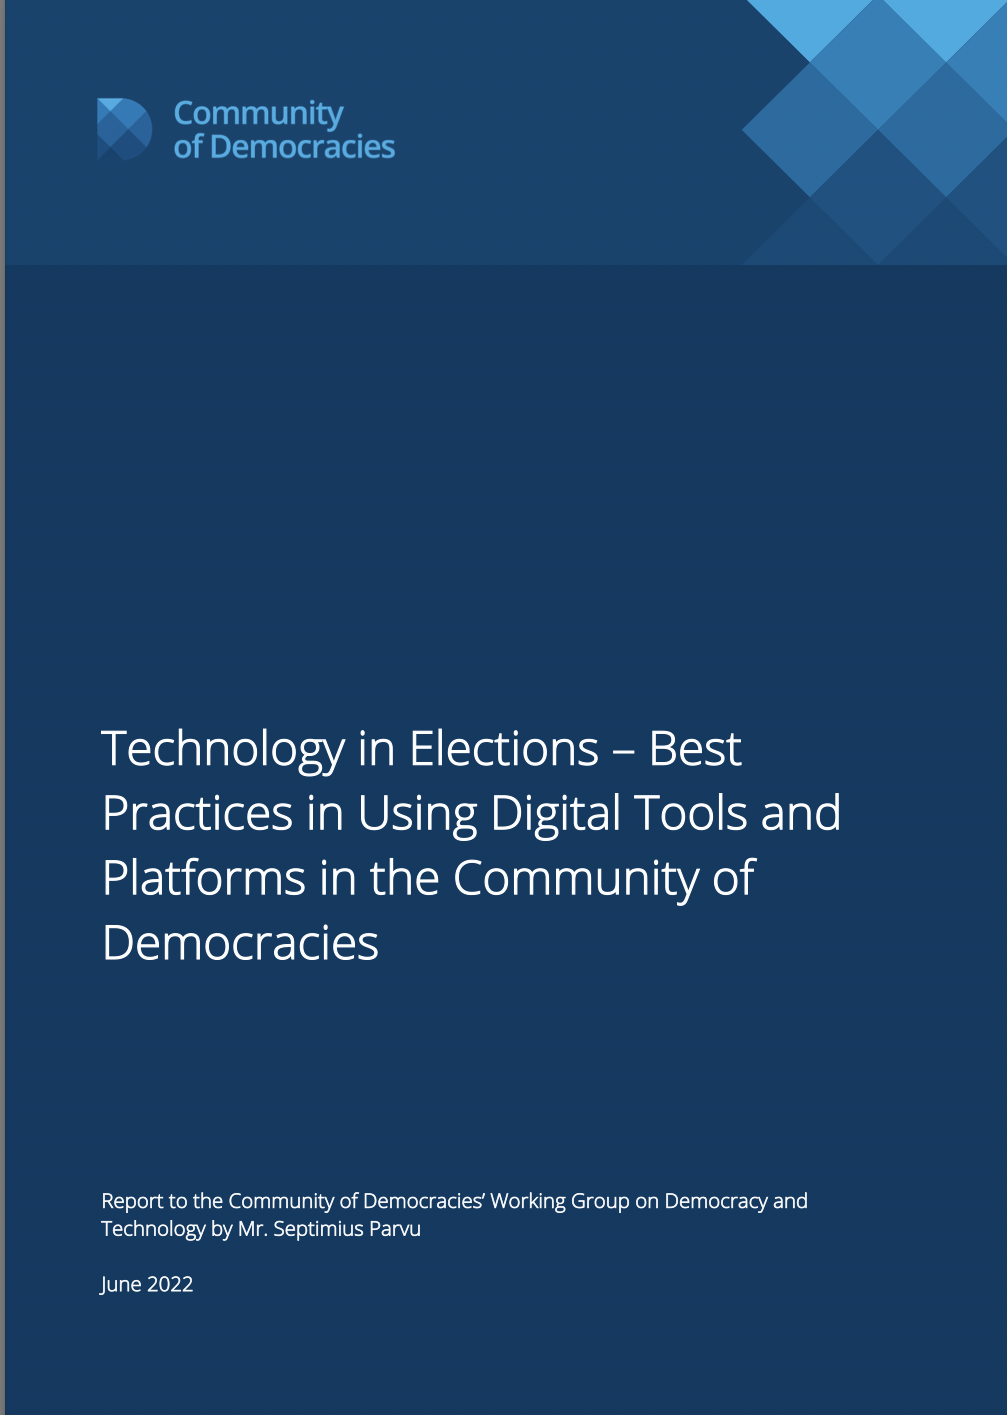 Technology in Elections. Best Practices in Using Digital Tools and Platforms in the Community of Democracies